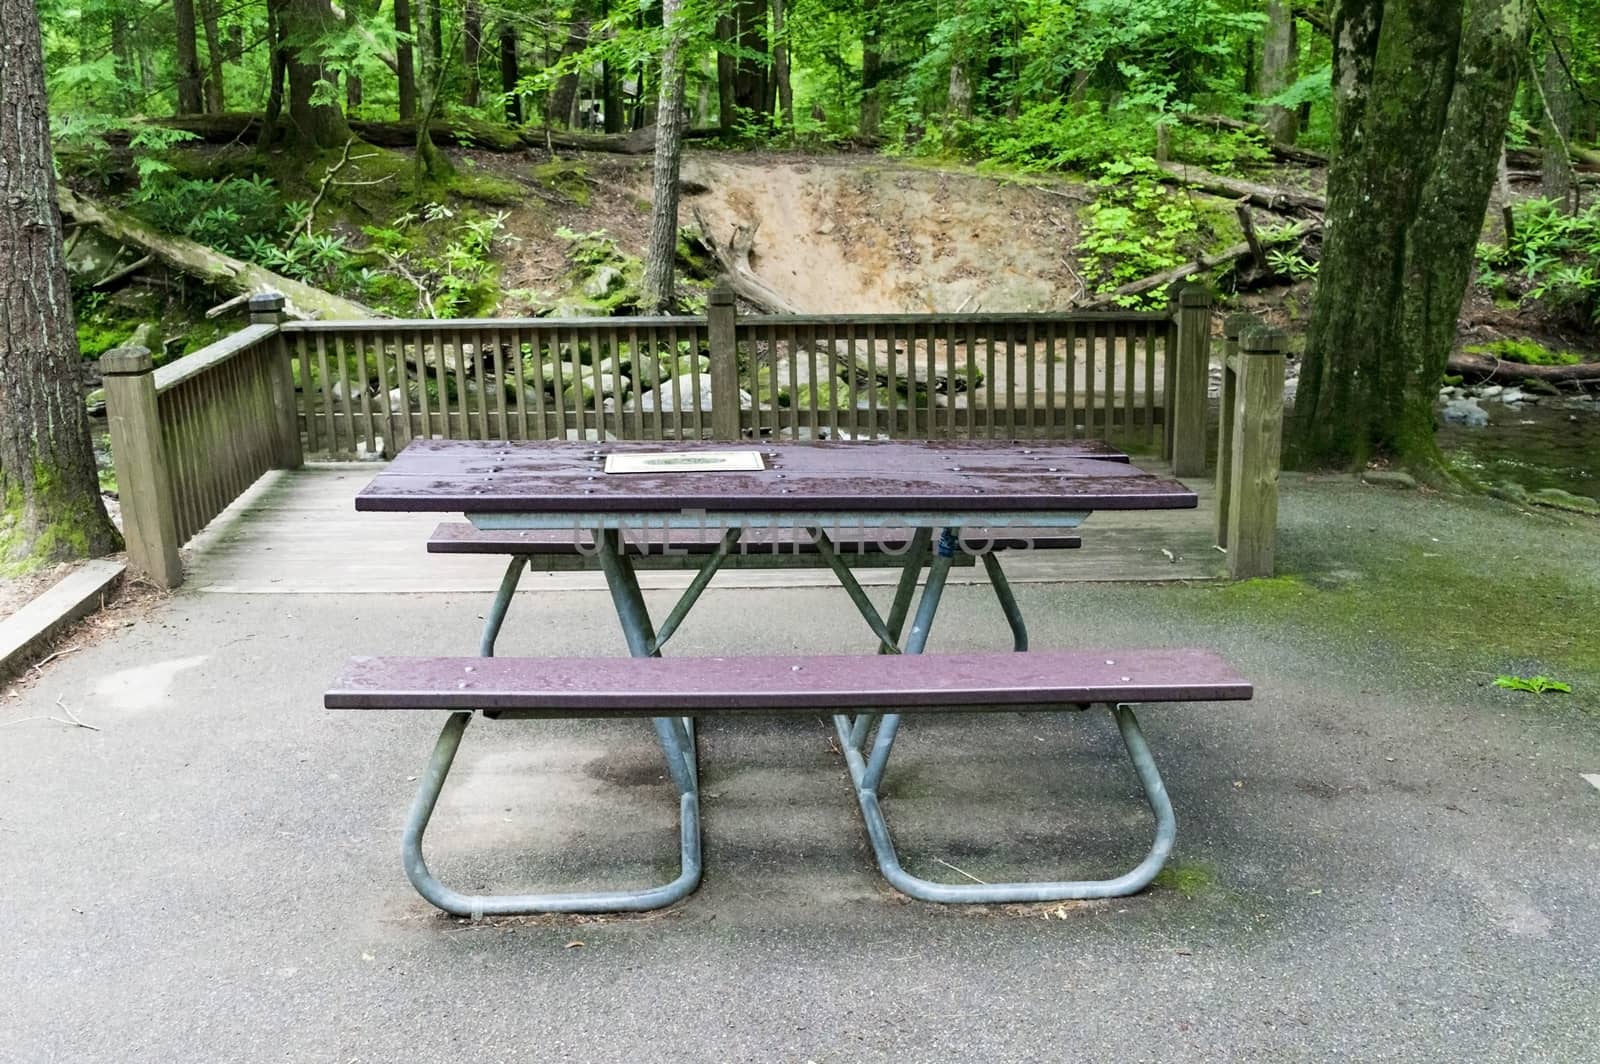 Horizontal shot of a picnic table in a wooded area with a fence behind it.